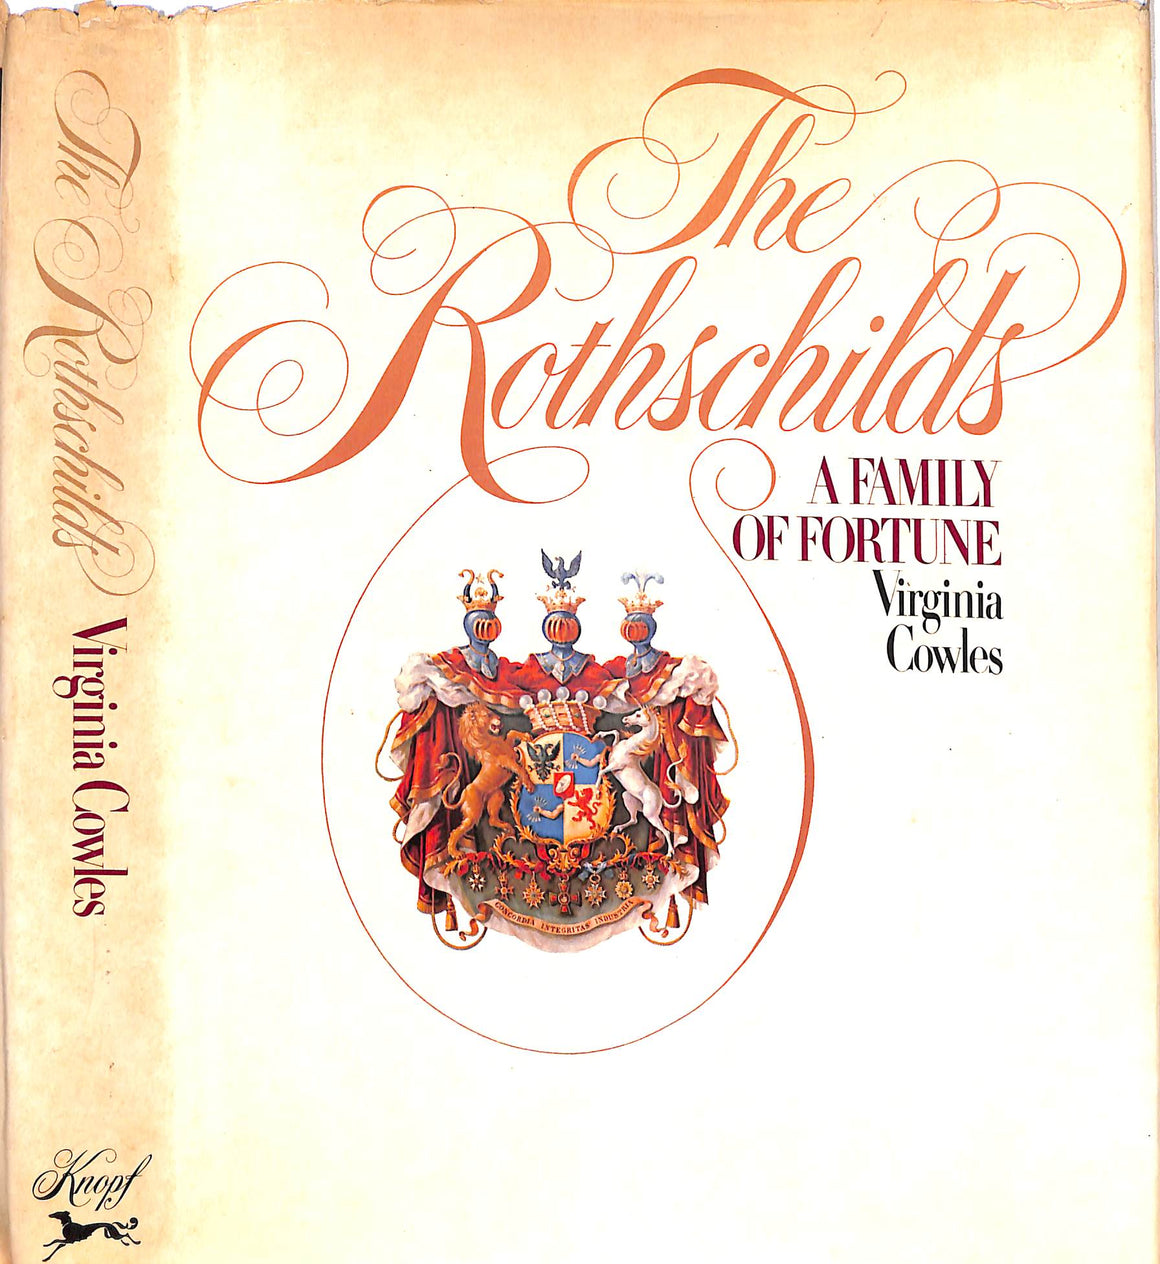 "The Rothschilds: A Family Of Fortune" 1973 COWLES, Virginia